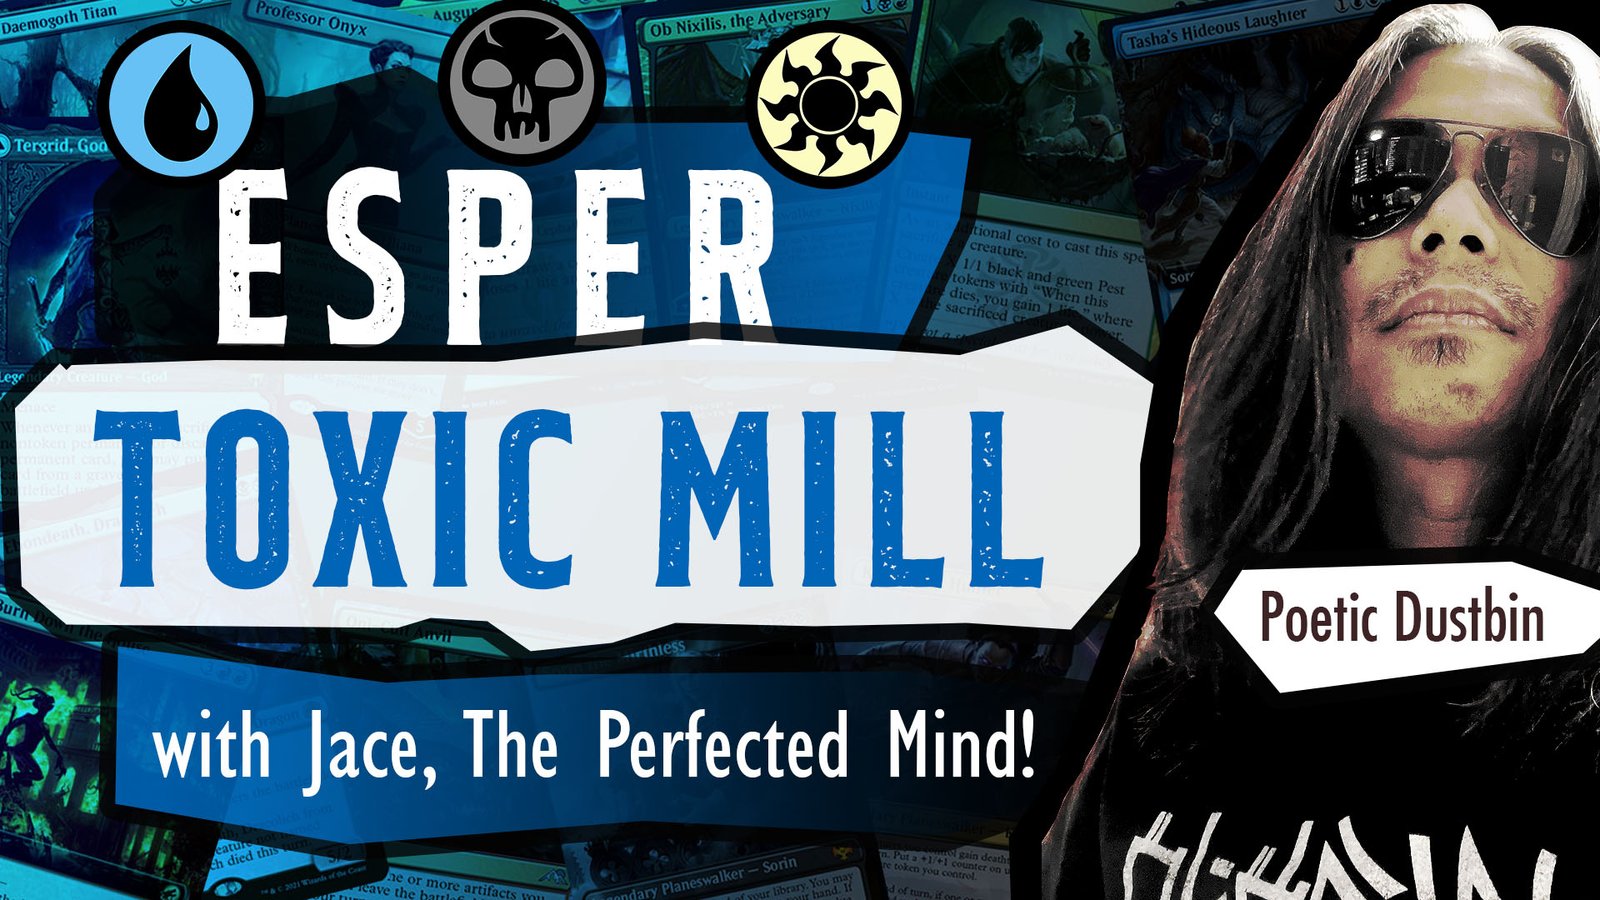 MTG ARena - Esper Toxic Mill with Jace The Perfected One